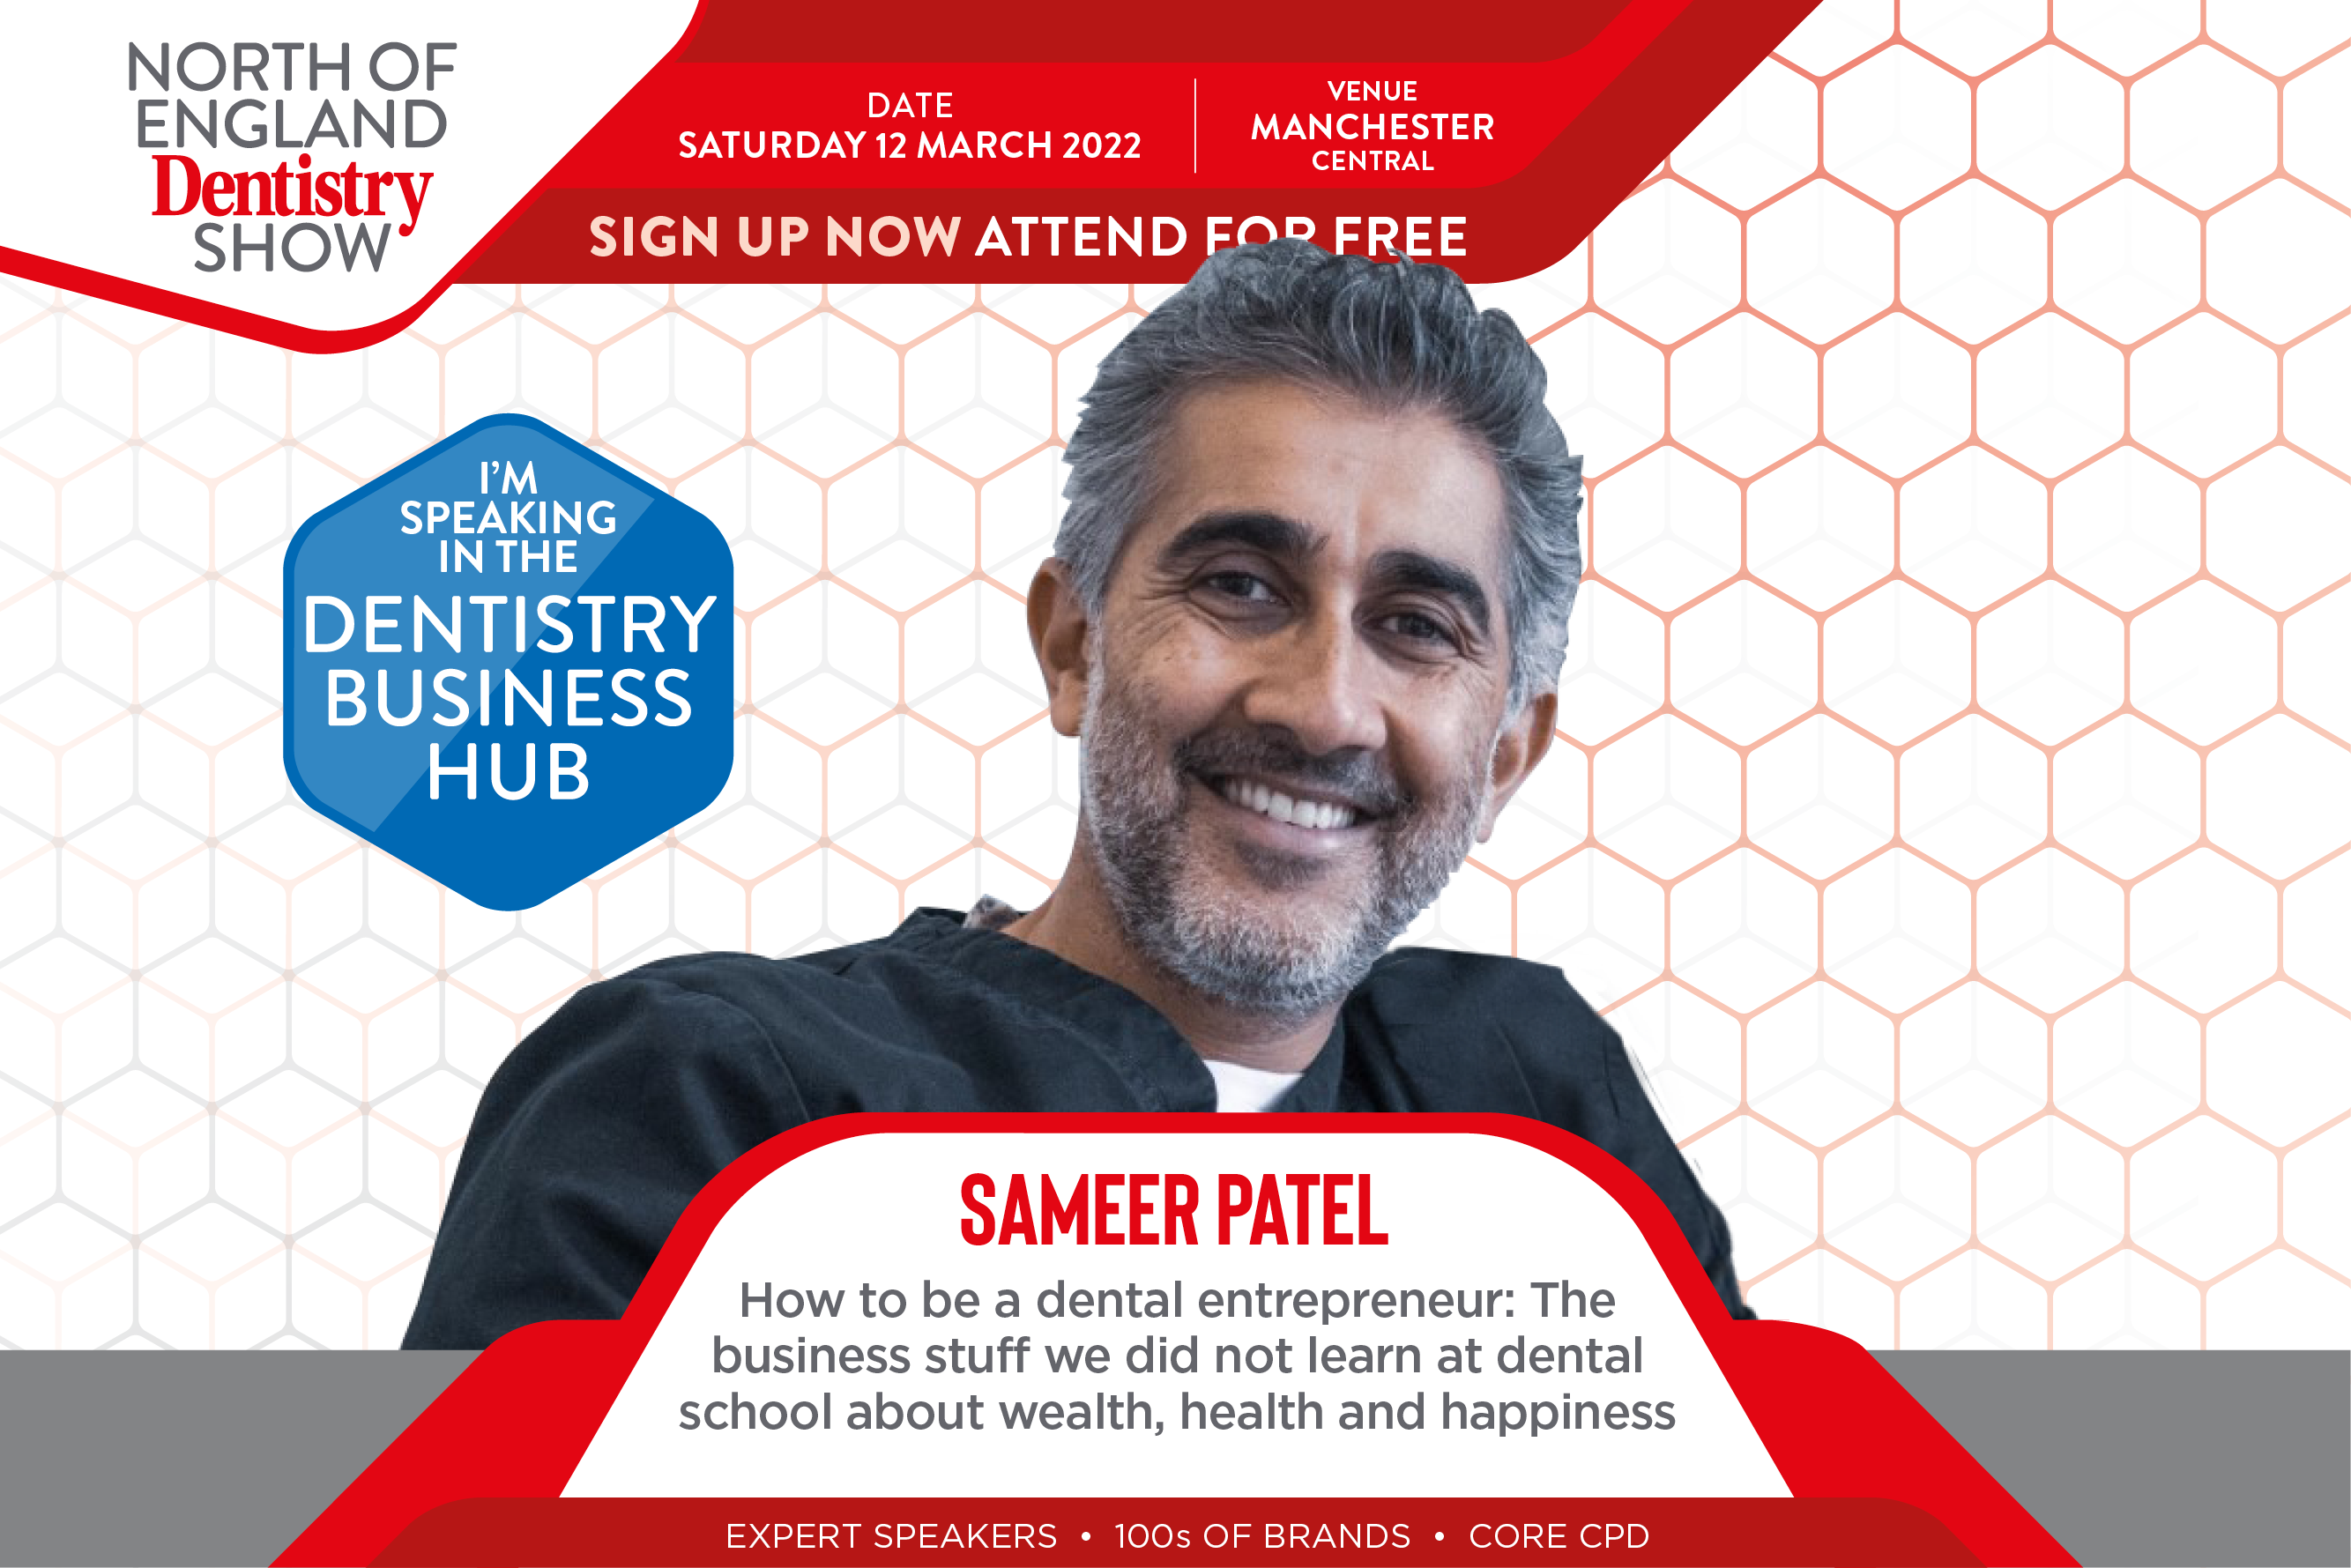 Sameer Patel at the North of England Dentistry Show